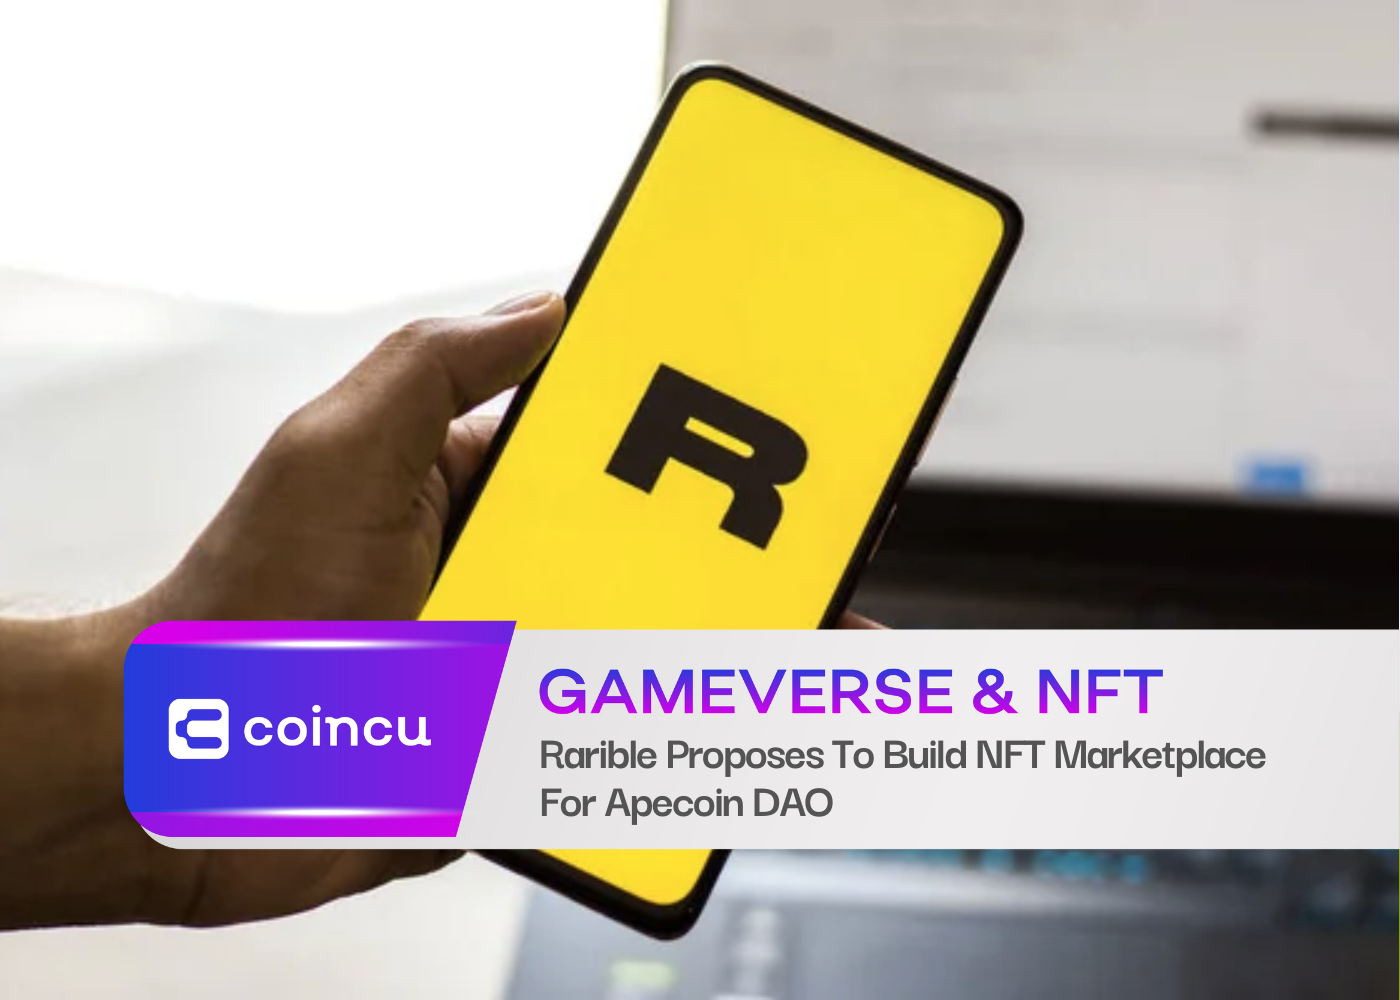 Rarible Proposes To Build NFT Marketplace For Apecoin DAO